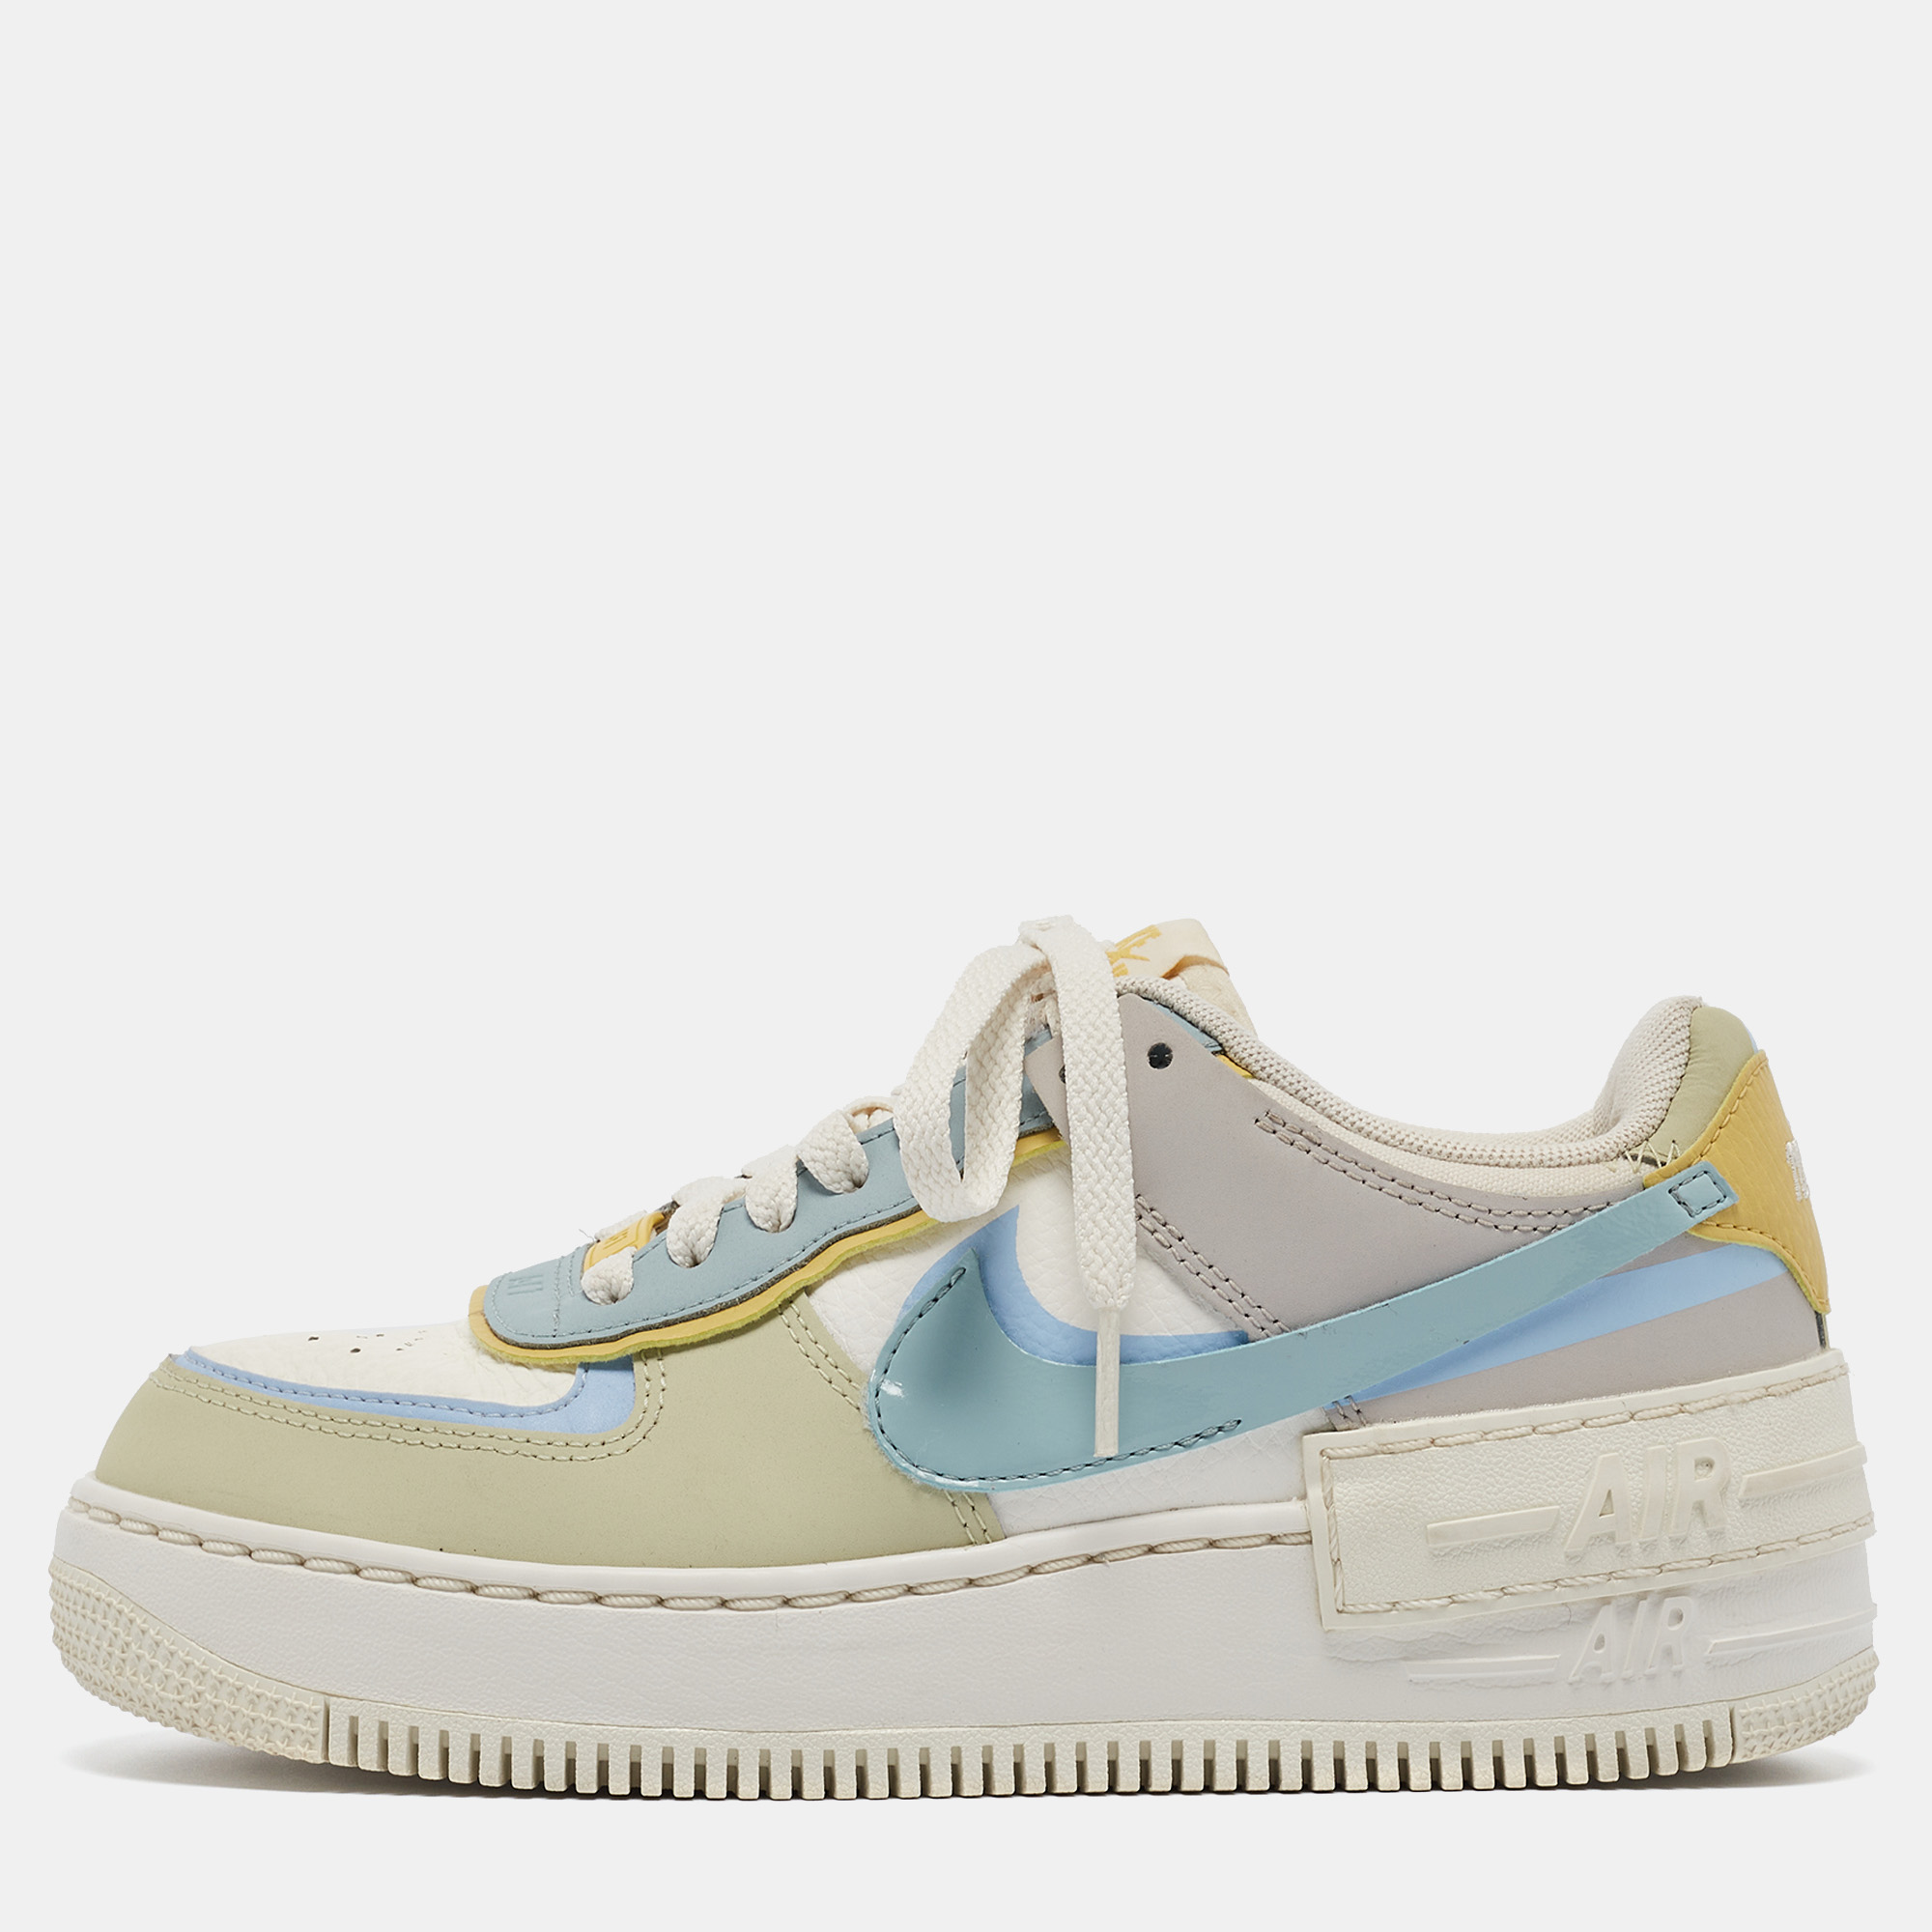 

Nike Multicolor Leather Air Force 1 Low Shadow Ocean Cube Sneakers Size 37.5